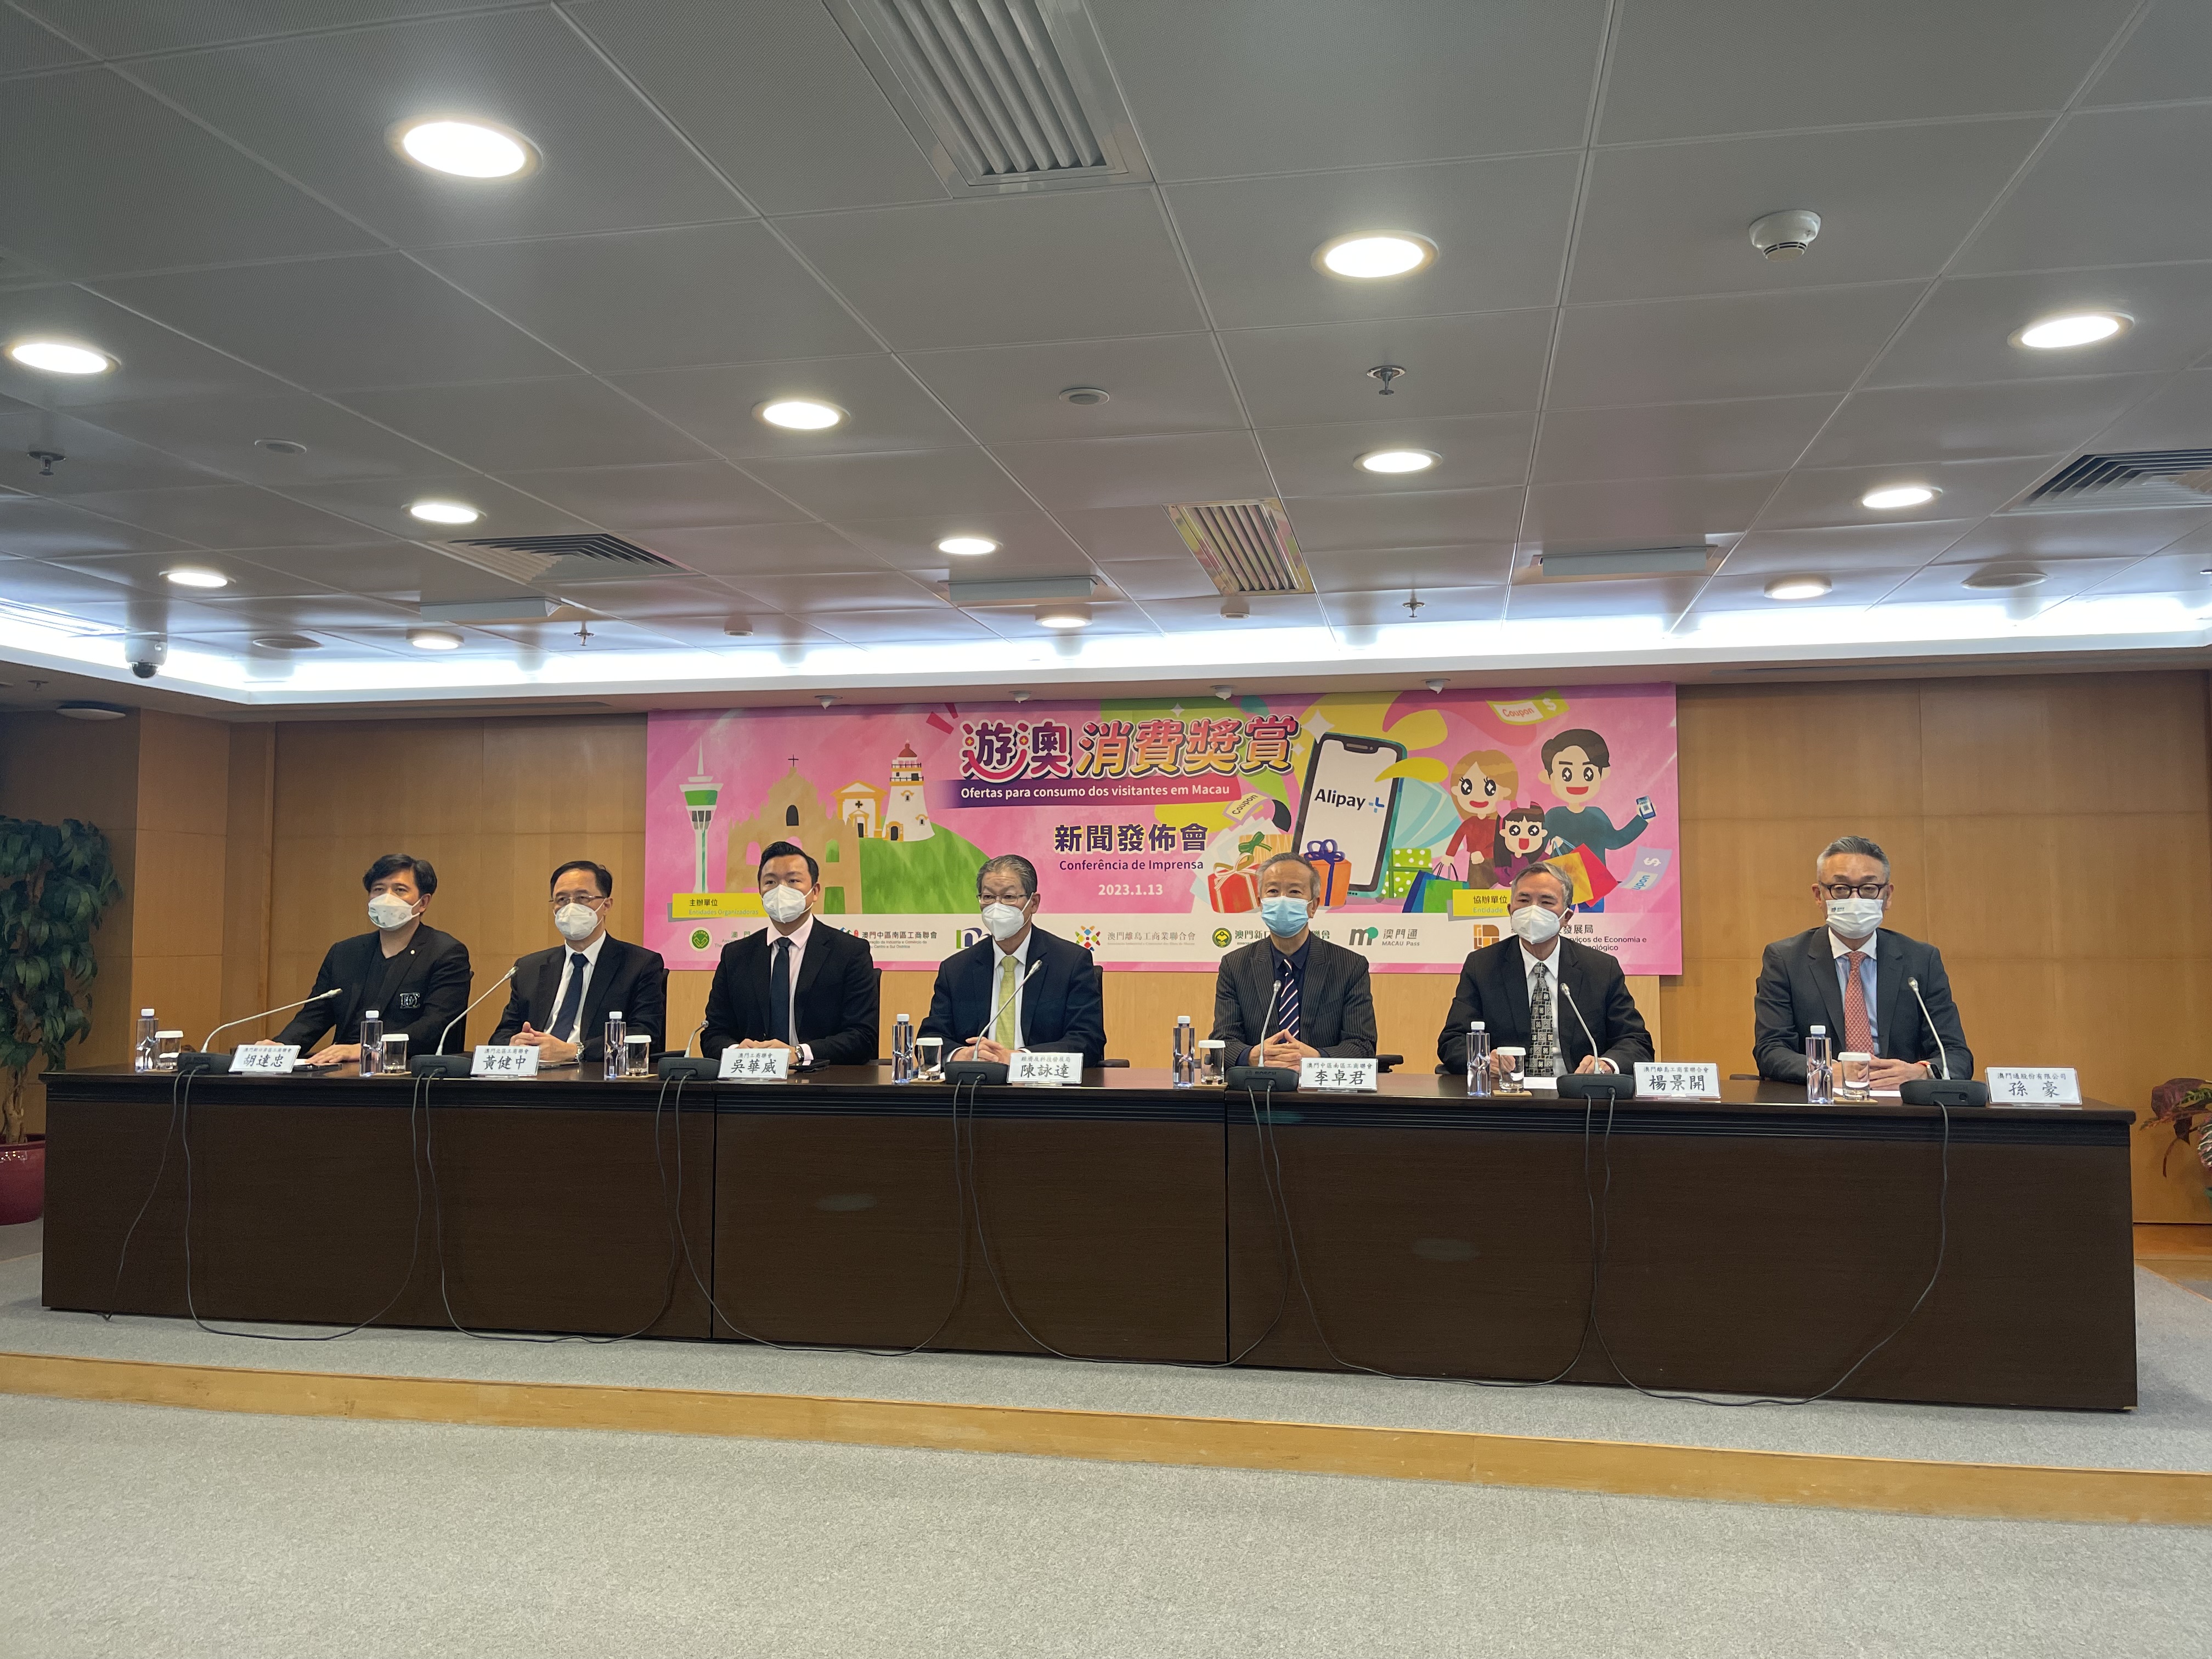 Alipay+ collaborates with Macao SAR government to boost local consumption and attract inbound tourists